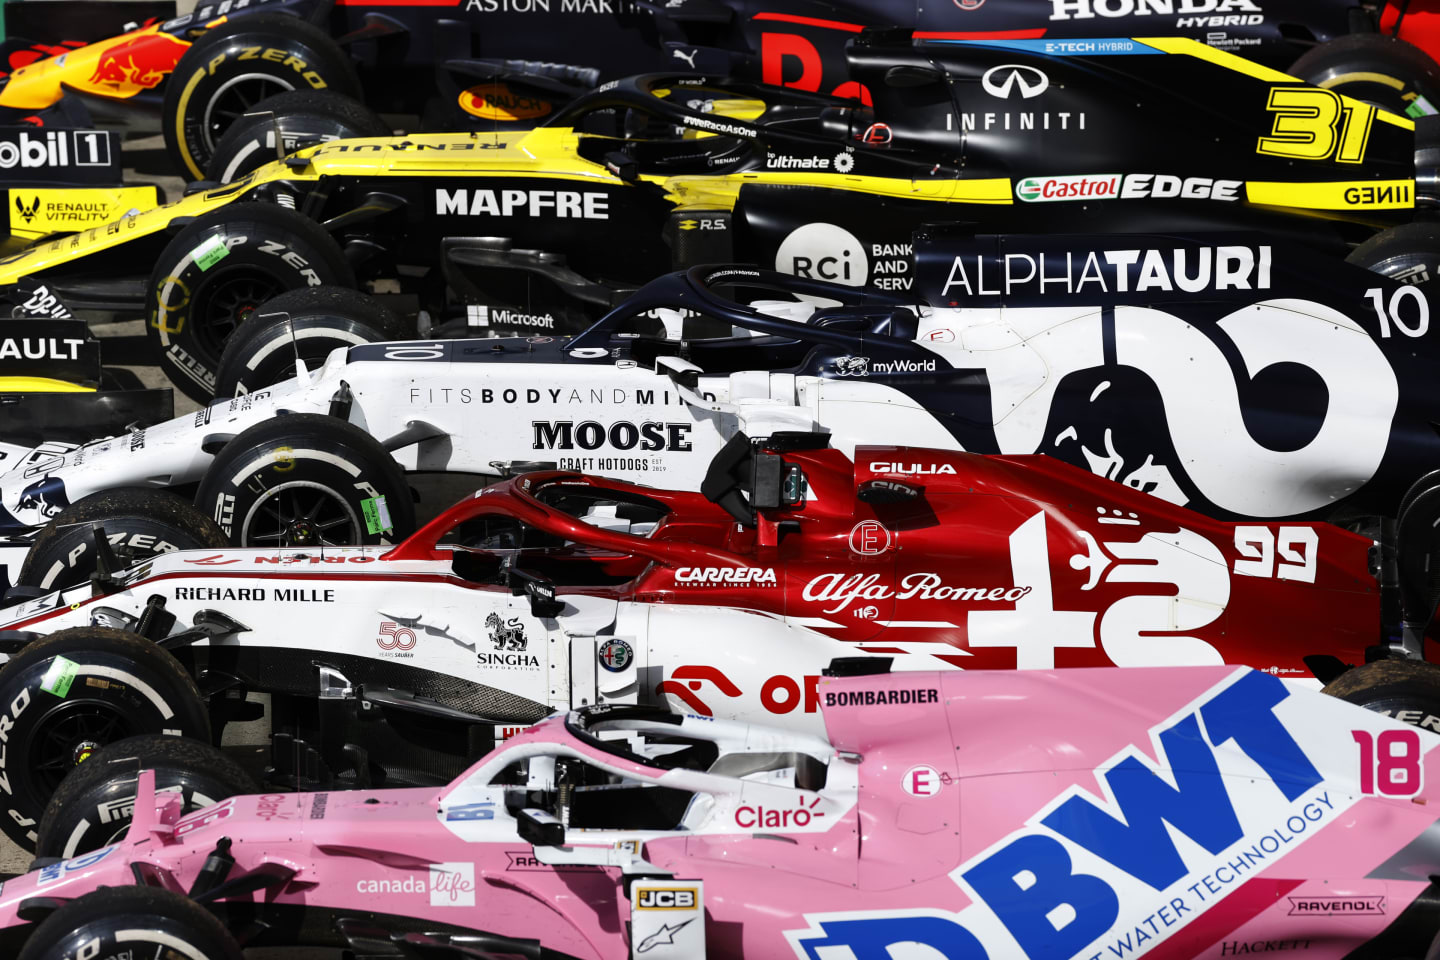 NORTHAMPTON, ENGLAND - AUGUST 02: A view of cars parked in parc ferme after the F1 Grand Prix of